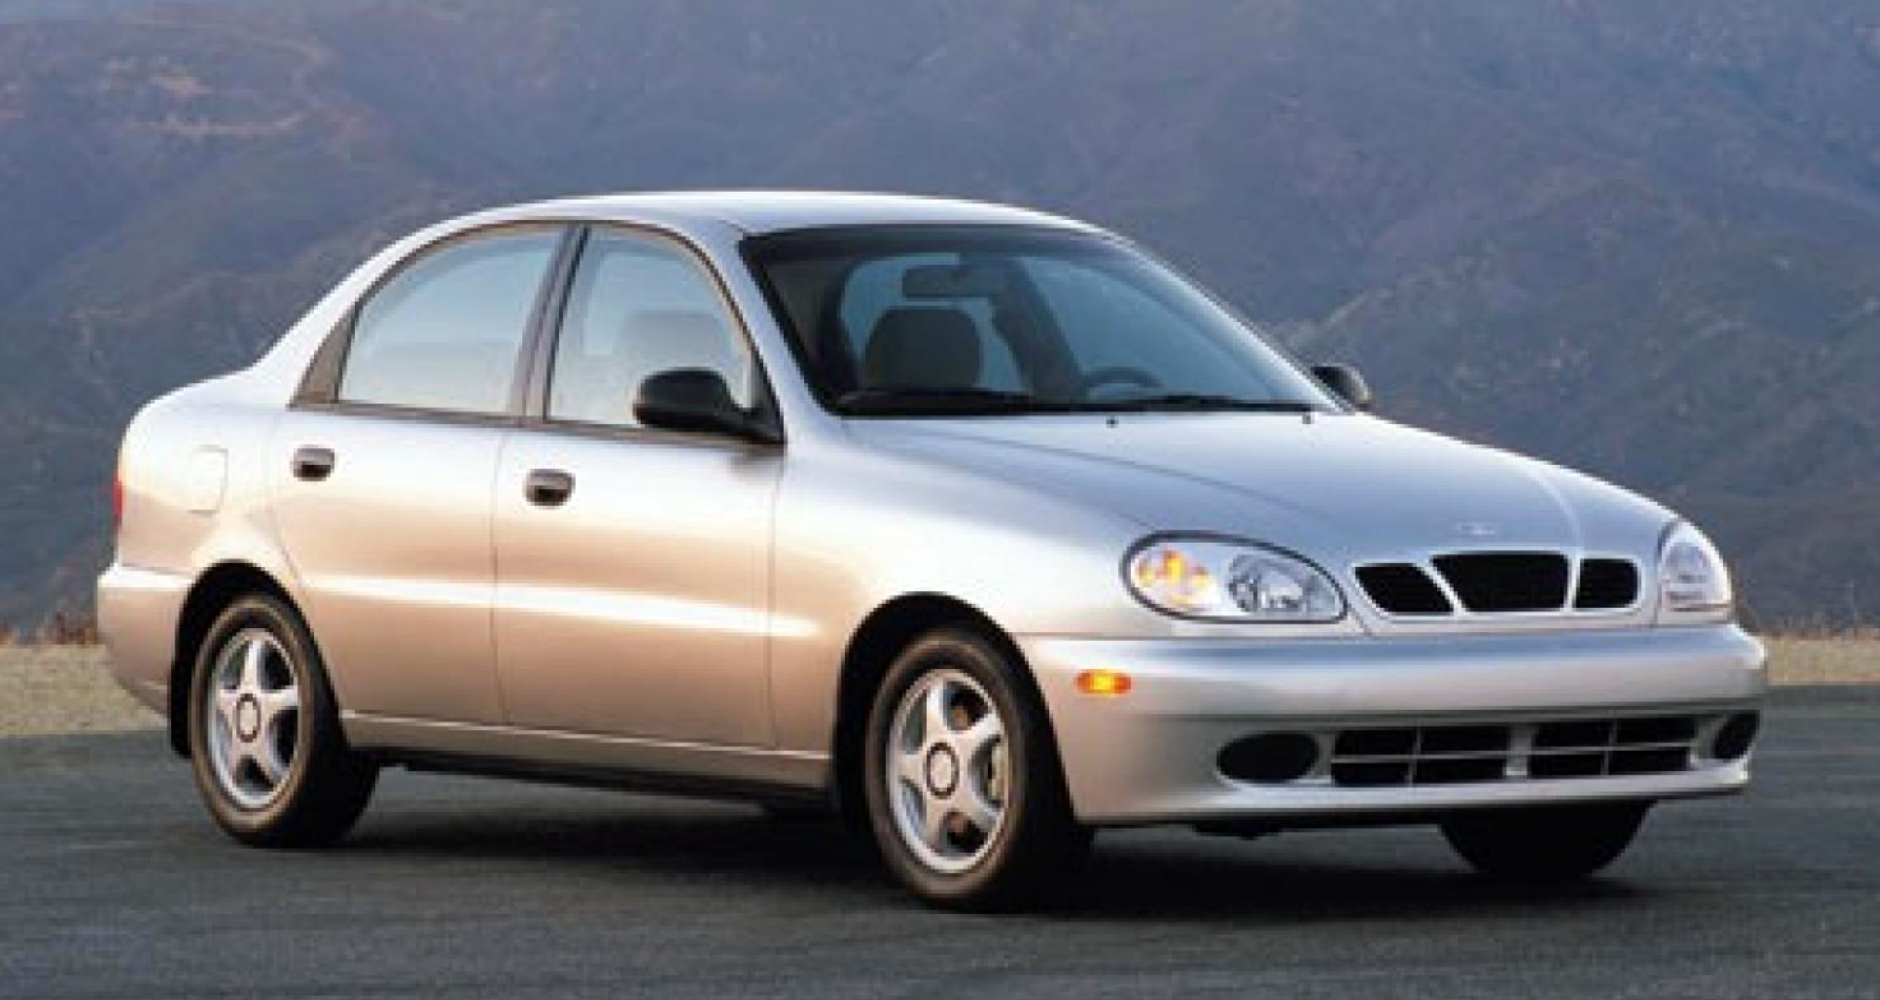 Quick Look: 2002 Daewoo Lanos | The Daily Drive | Consumer Guide® The Daily  Drive | Consumer Guide®